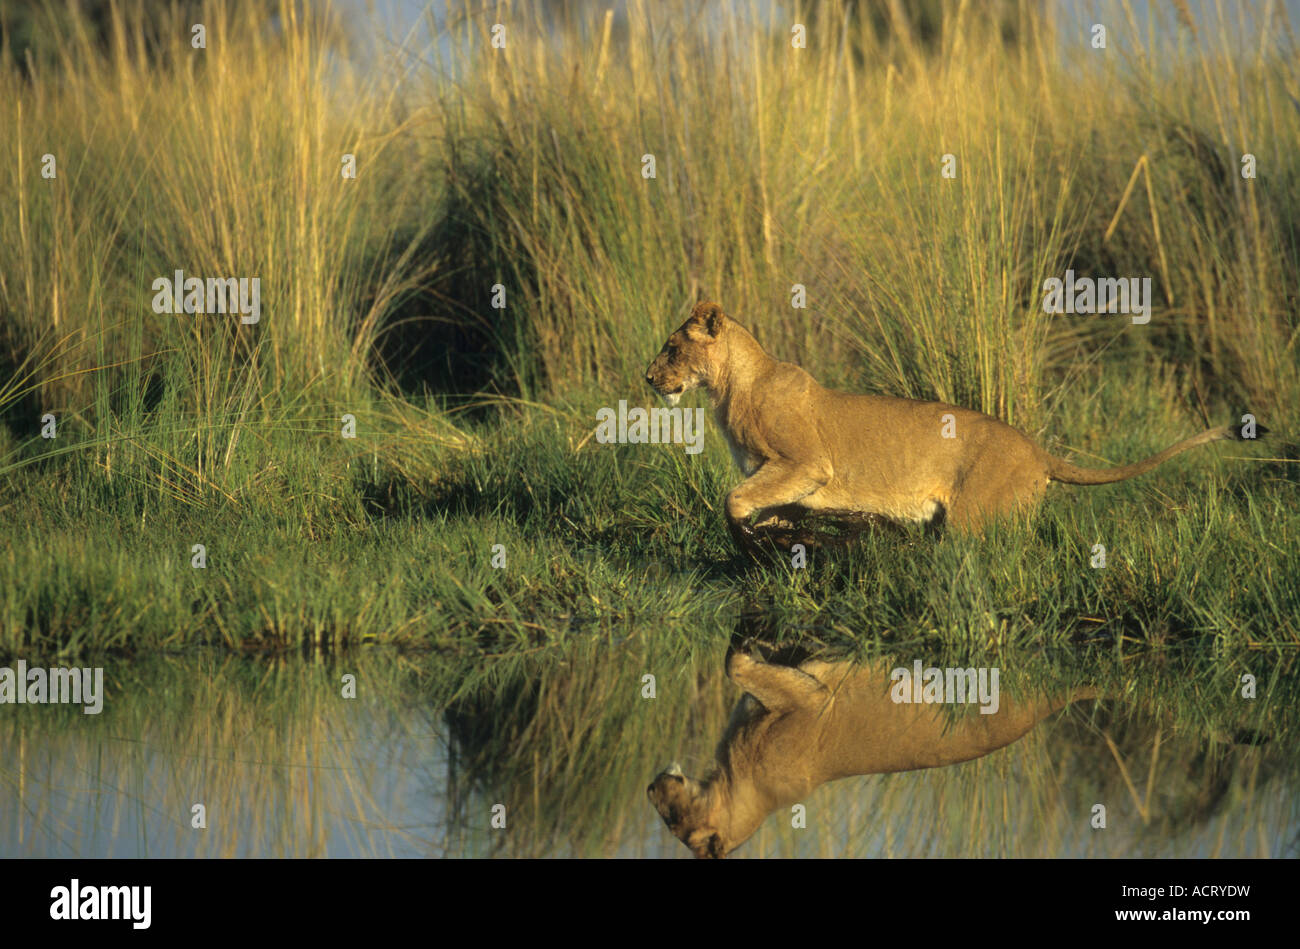 Lion reflected in water as it jumps over a section of open water Chitabe Okavango delta Botswana Stock Photo